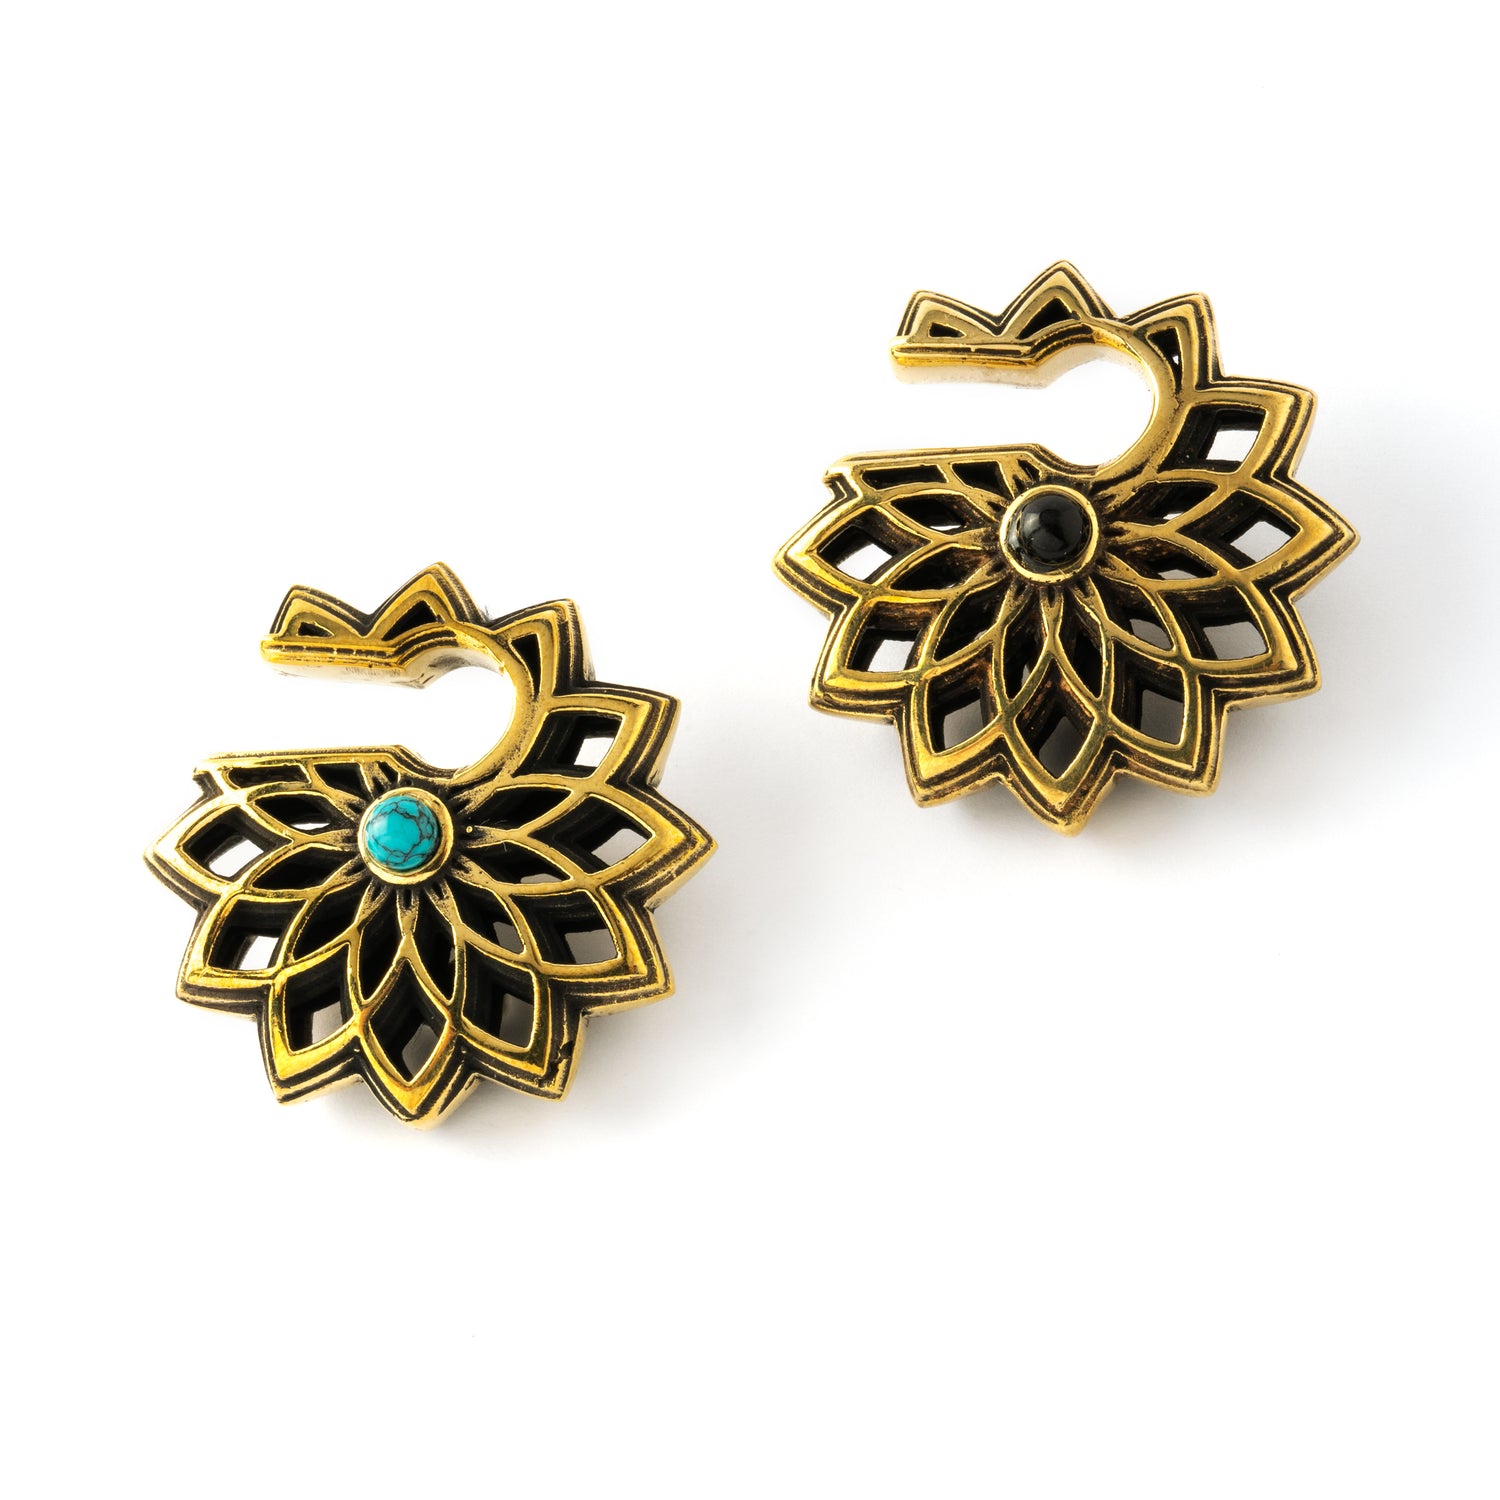 pair of antique gold colour geometric flower ear weights hangers with black onyx and turquoise frontal view